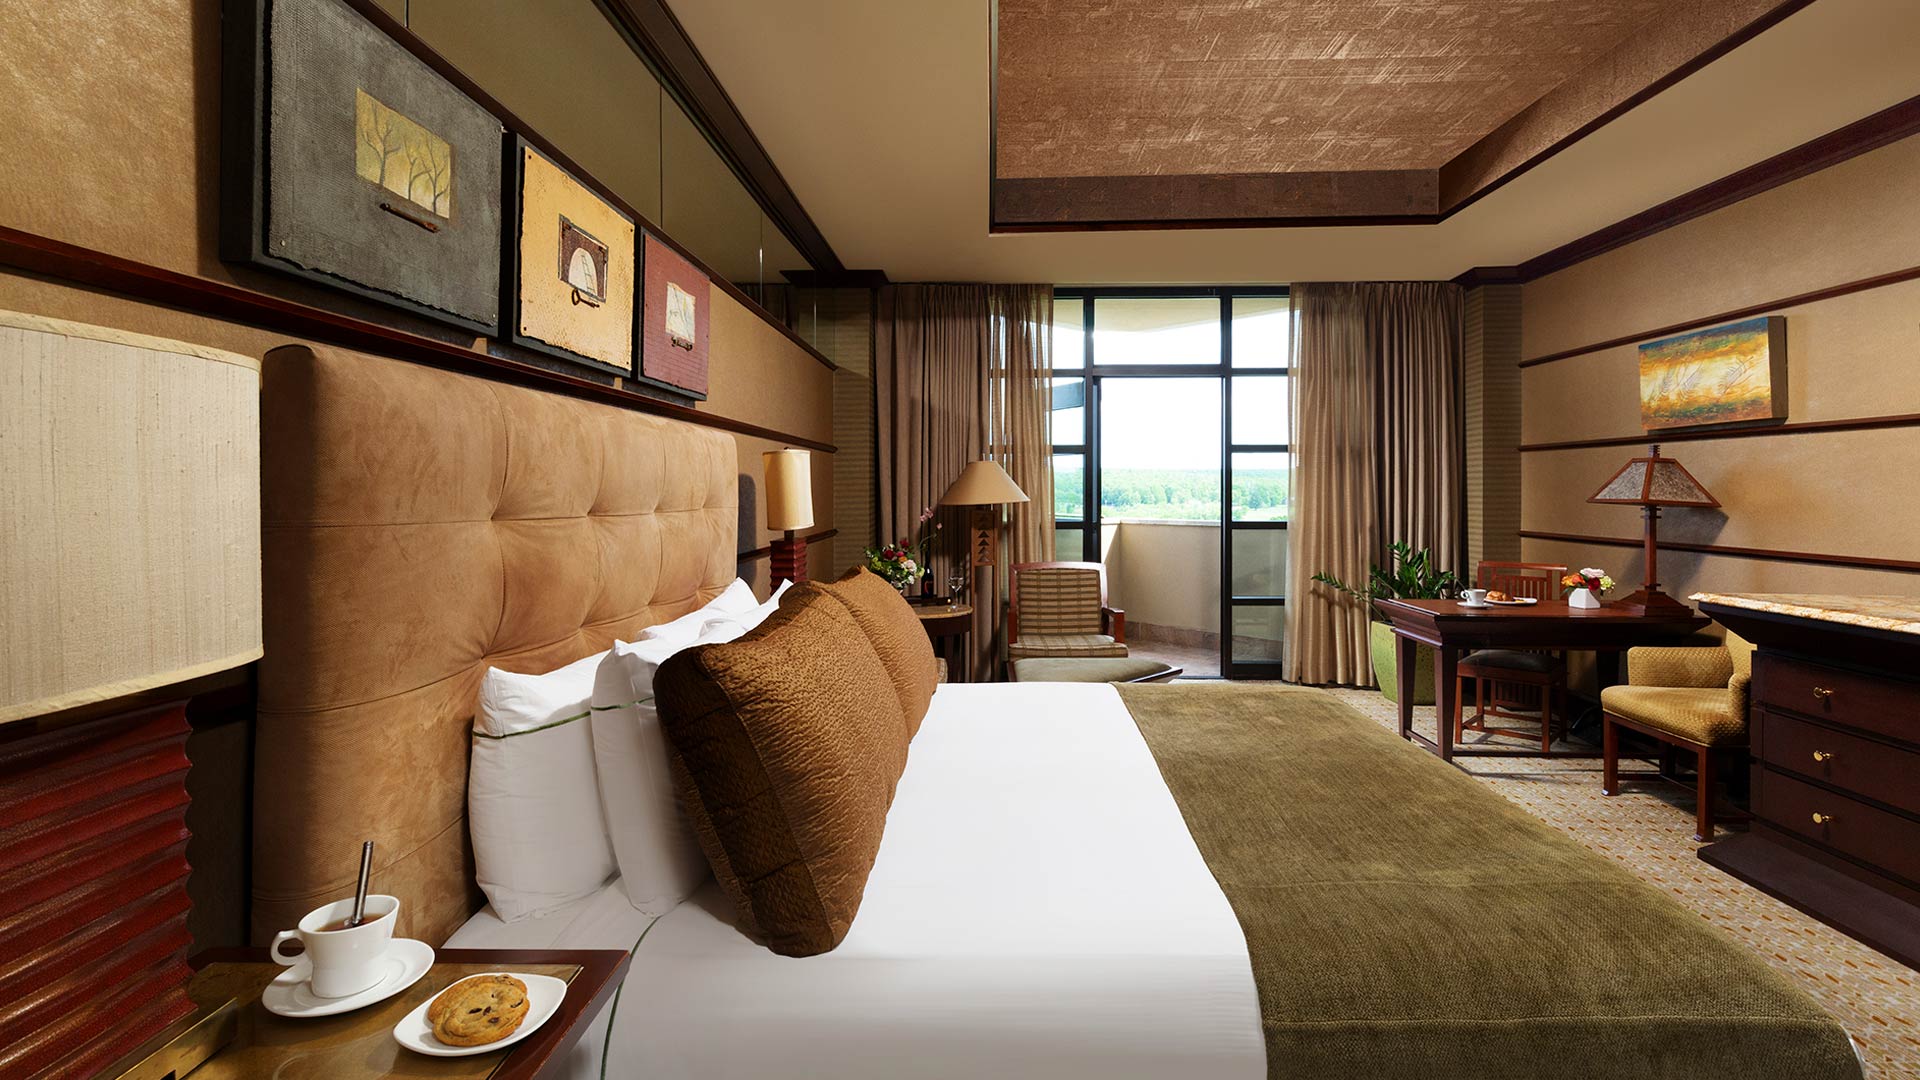 an interior shot of Falling Rock's balcony king room. There is a bed with a plush headboard and white, green and brown bedding. There is a sitting area with a table and dresser across from the bed. There is a door that leads to a balcony overlooking the resort grounds.